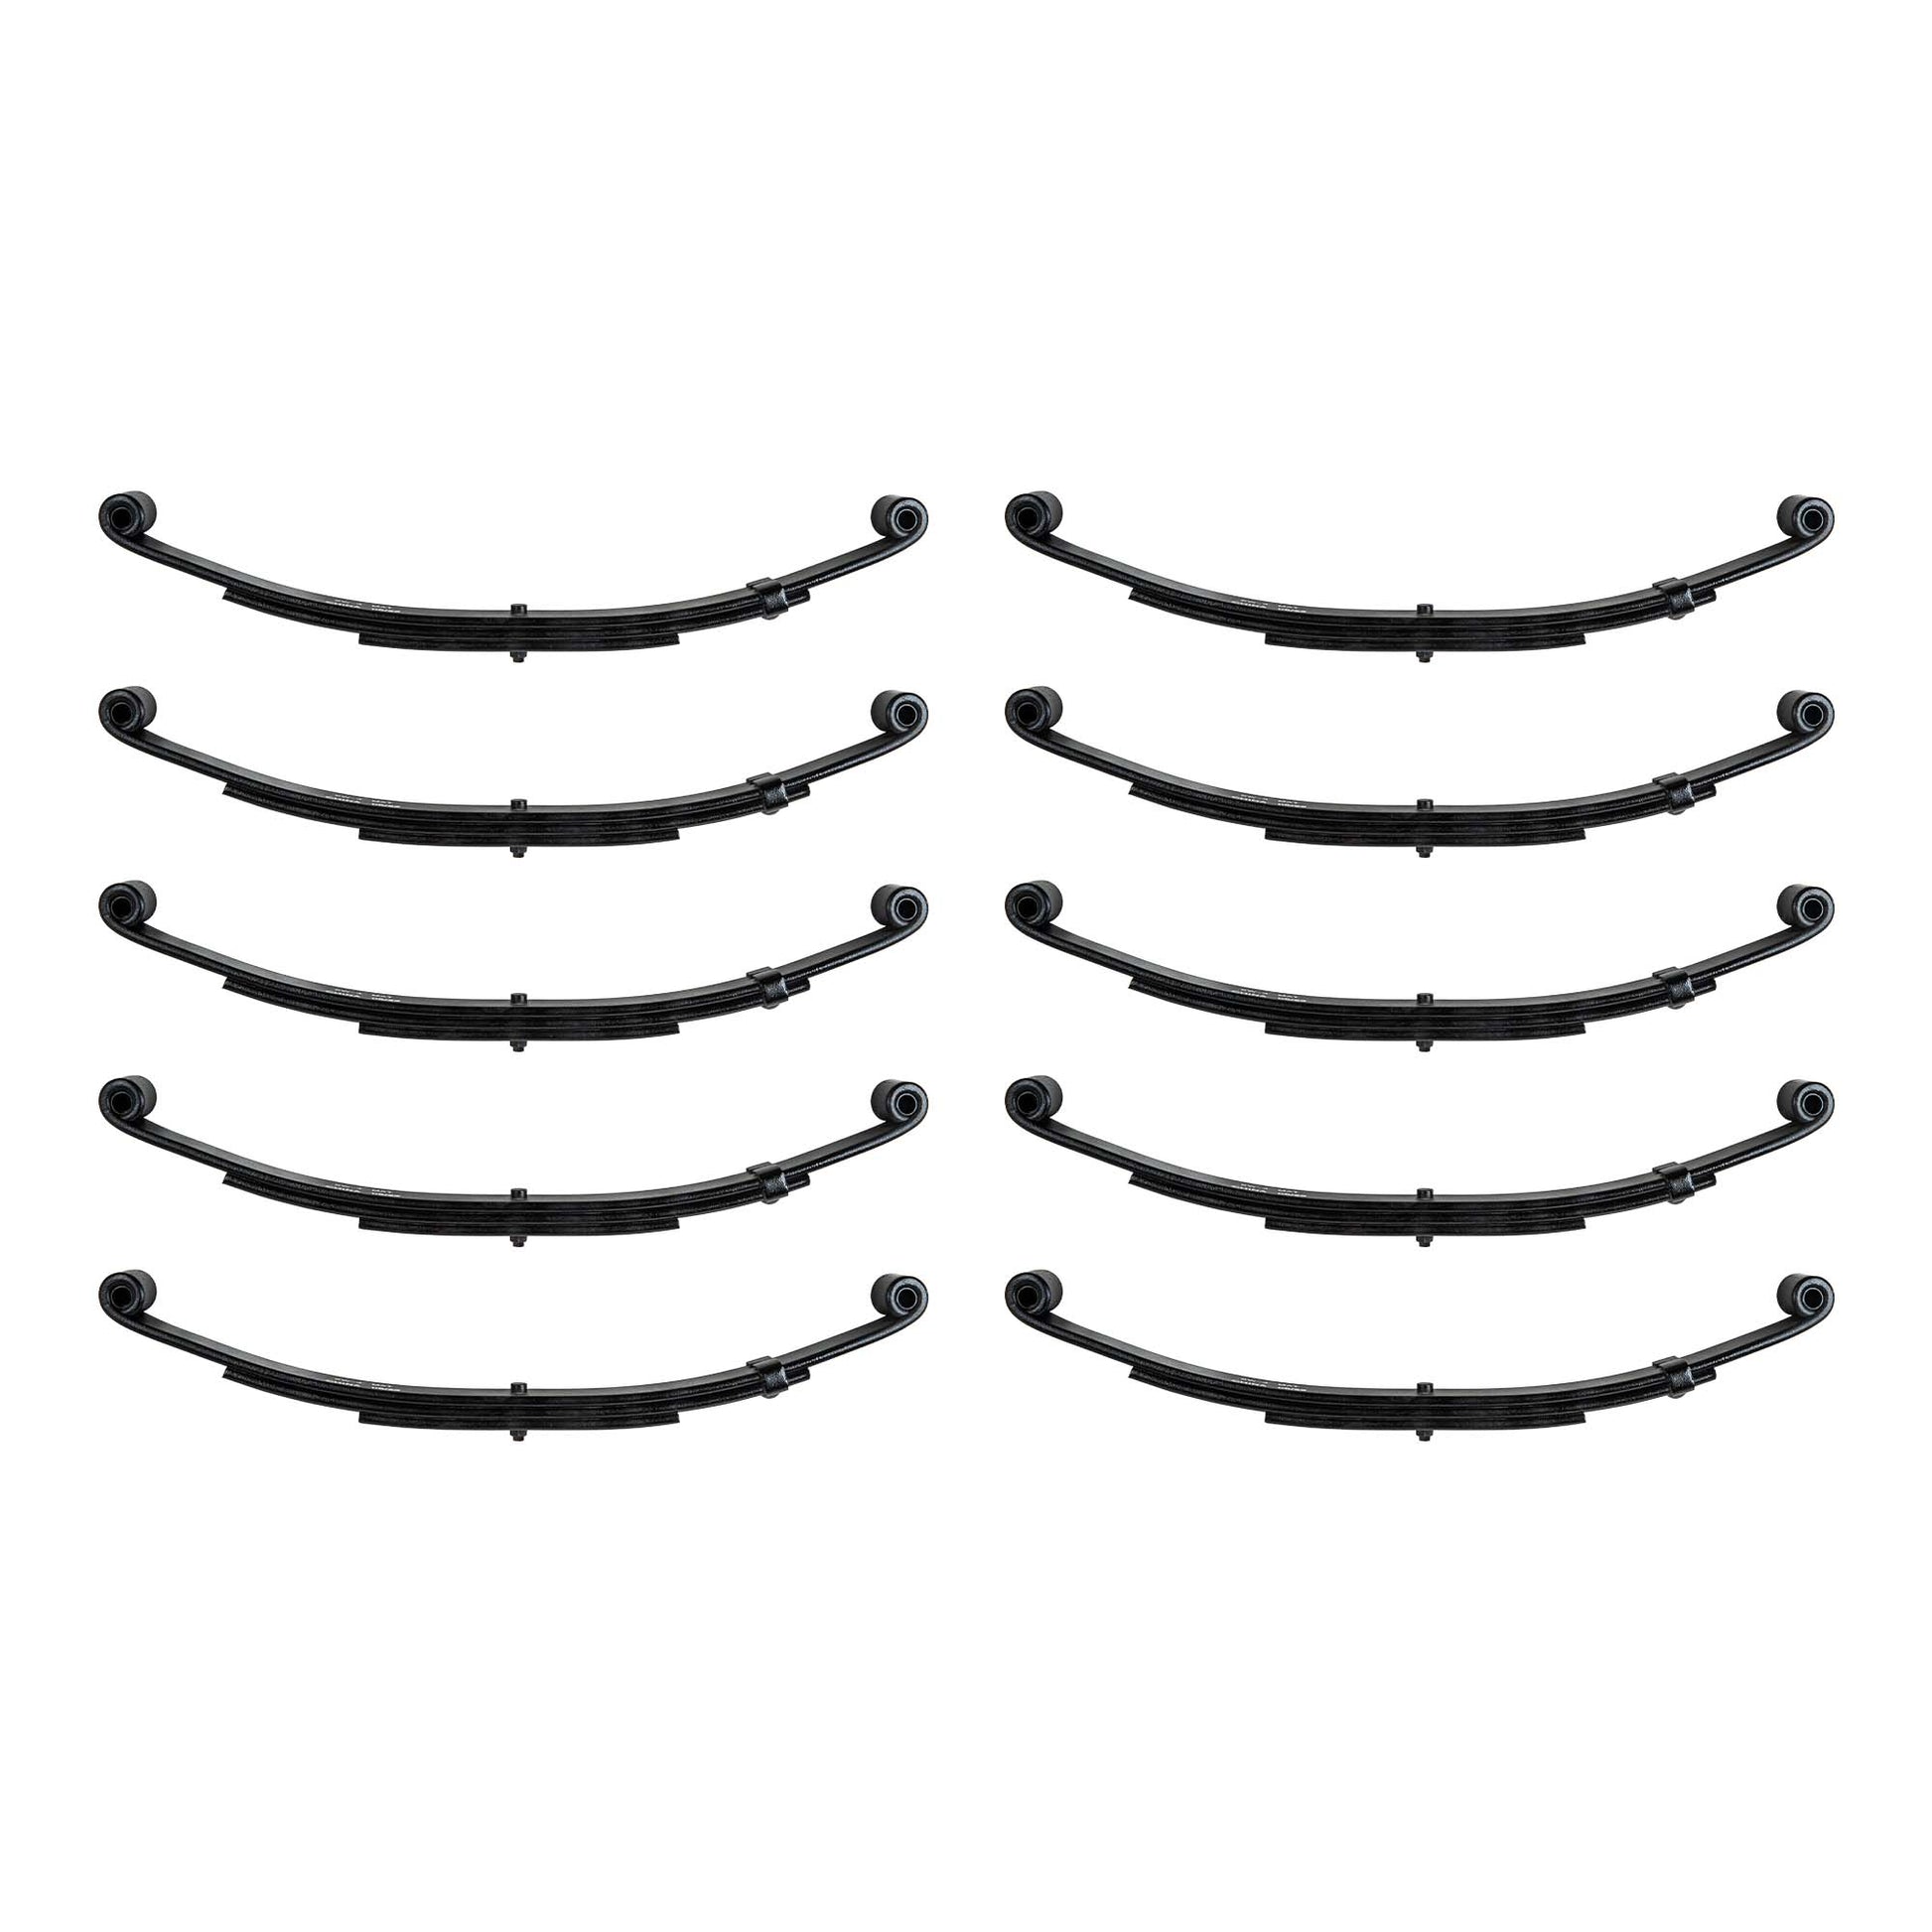 Set of 10 - 3 Leaf 25 1/4" x 1 3/4" Trailer Double Eye Spring for 2000 lb Axles